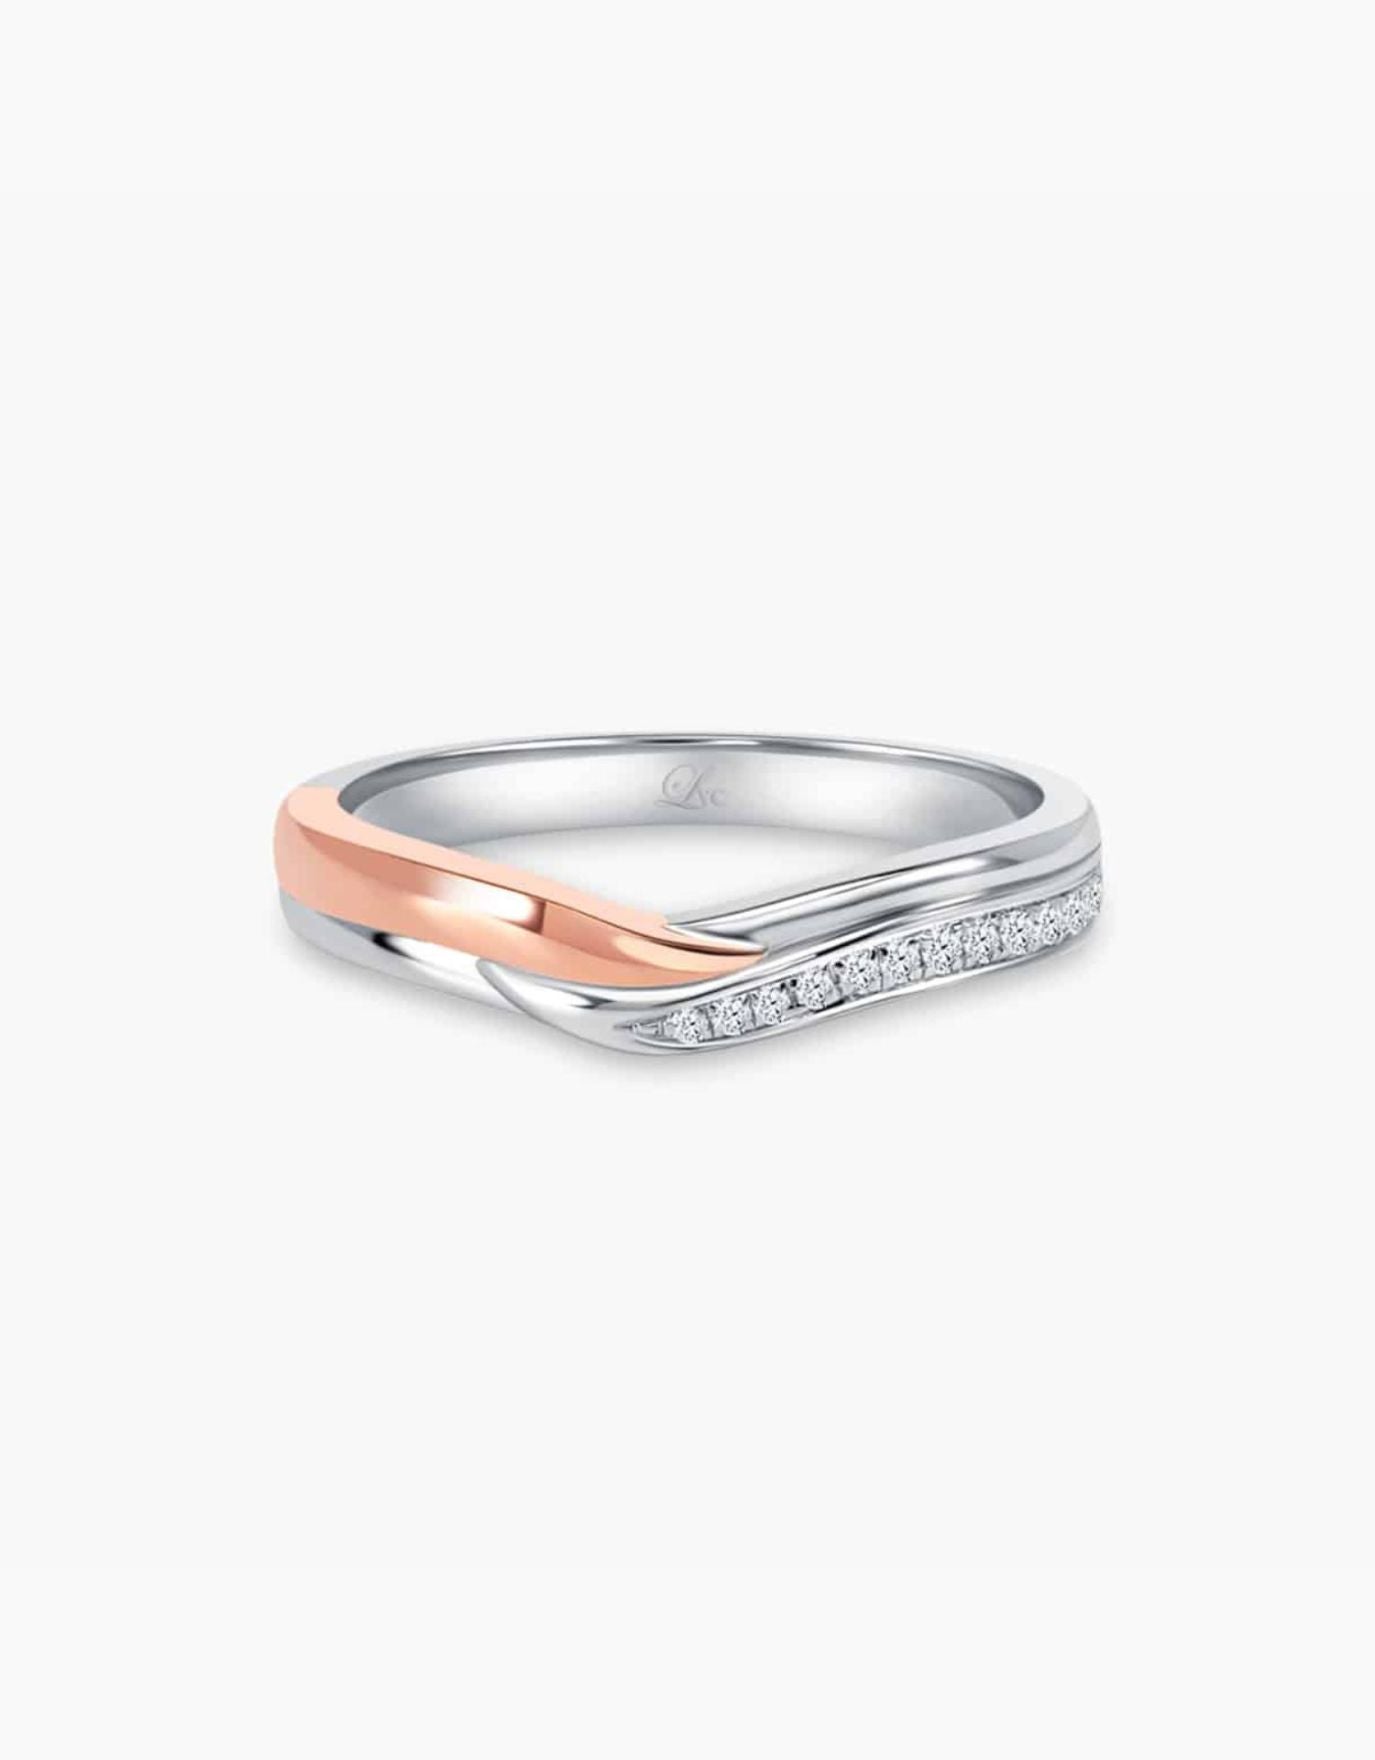 LVC Perfection Hope Wedding Band in White and Rose Gold with Diamonds